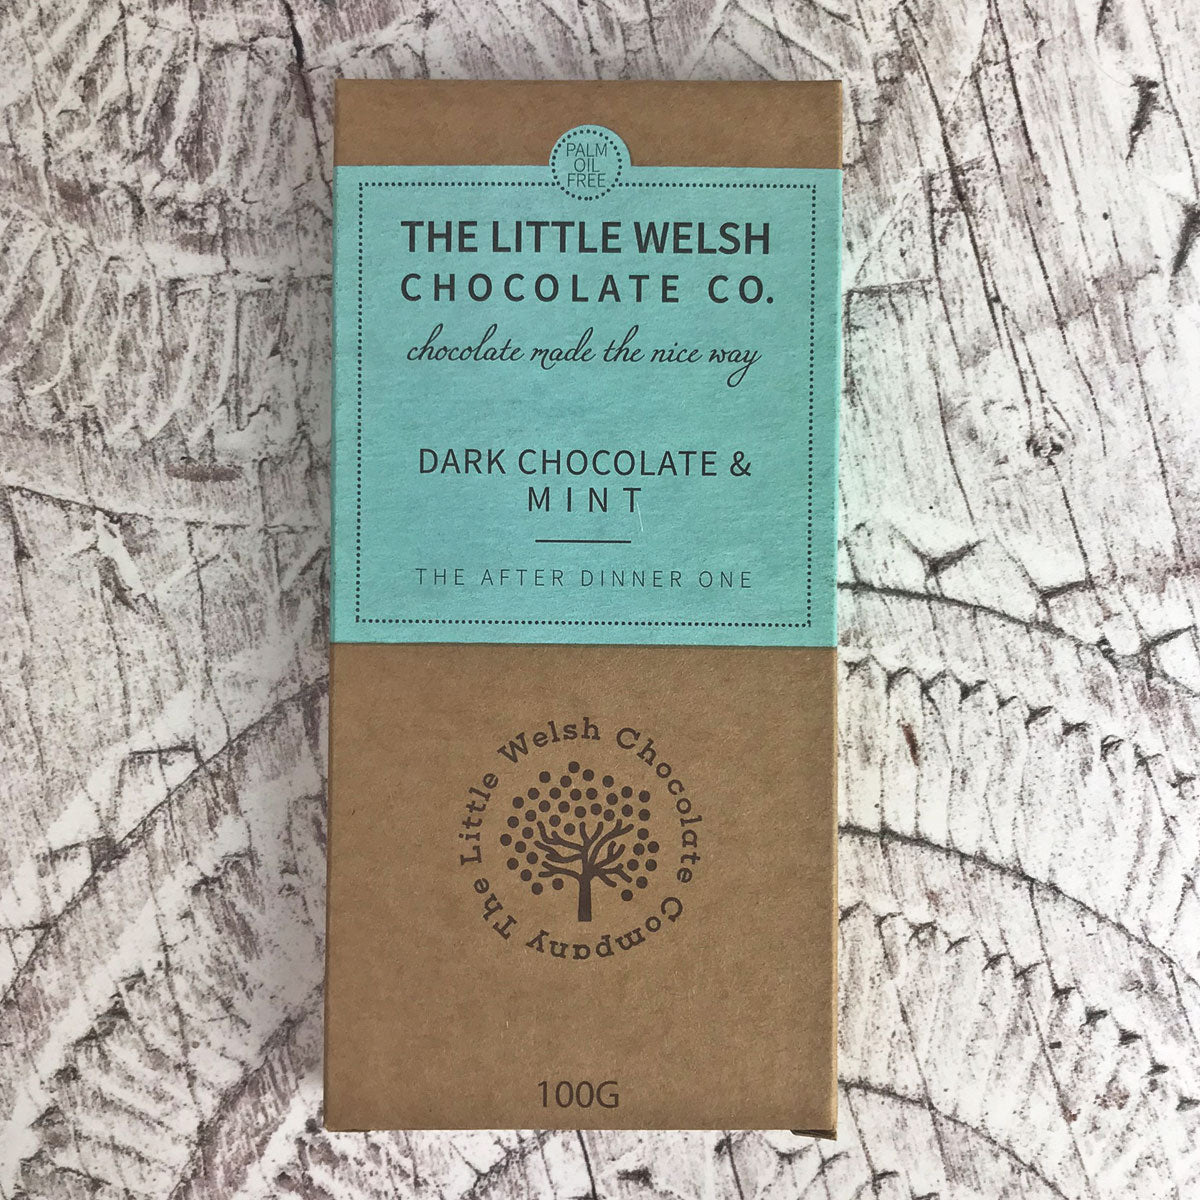 Dark Chocolate and Mint Bar by The Little Chocolate Welsh Company